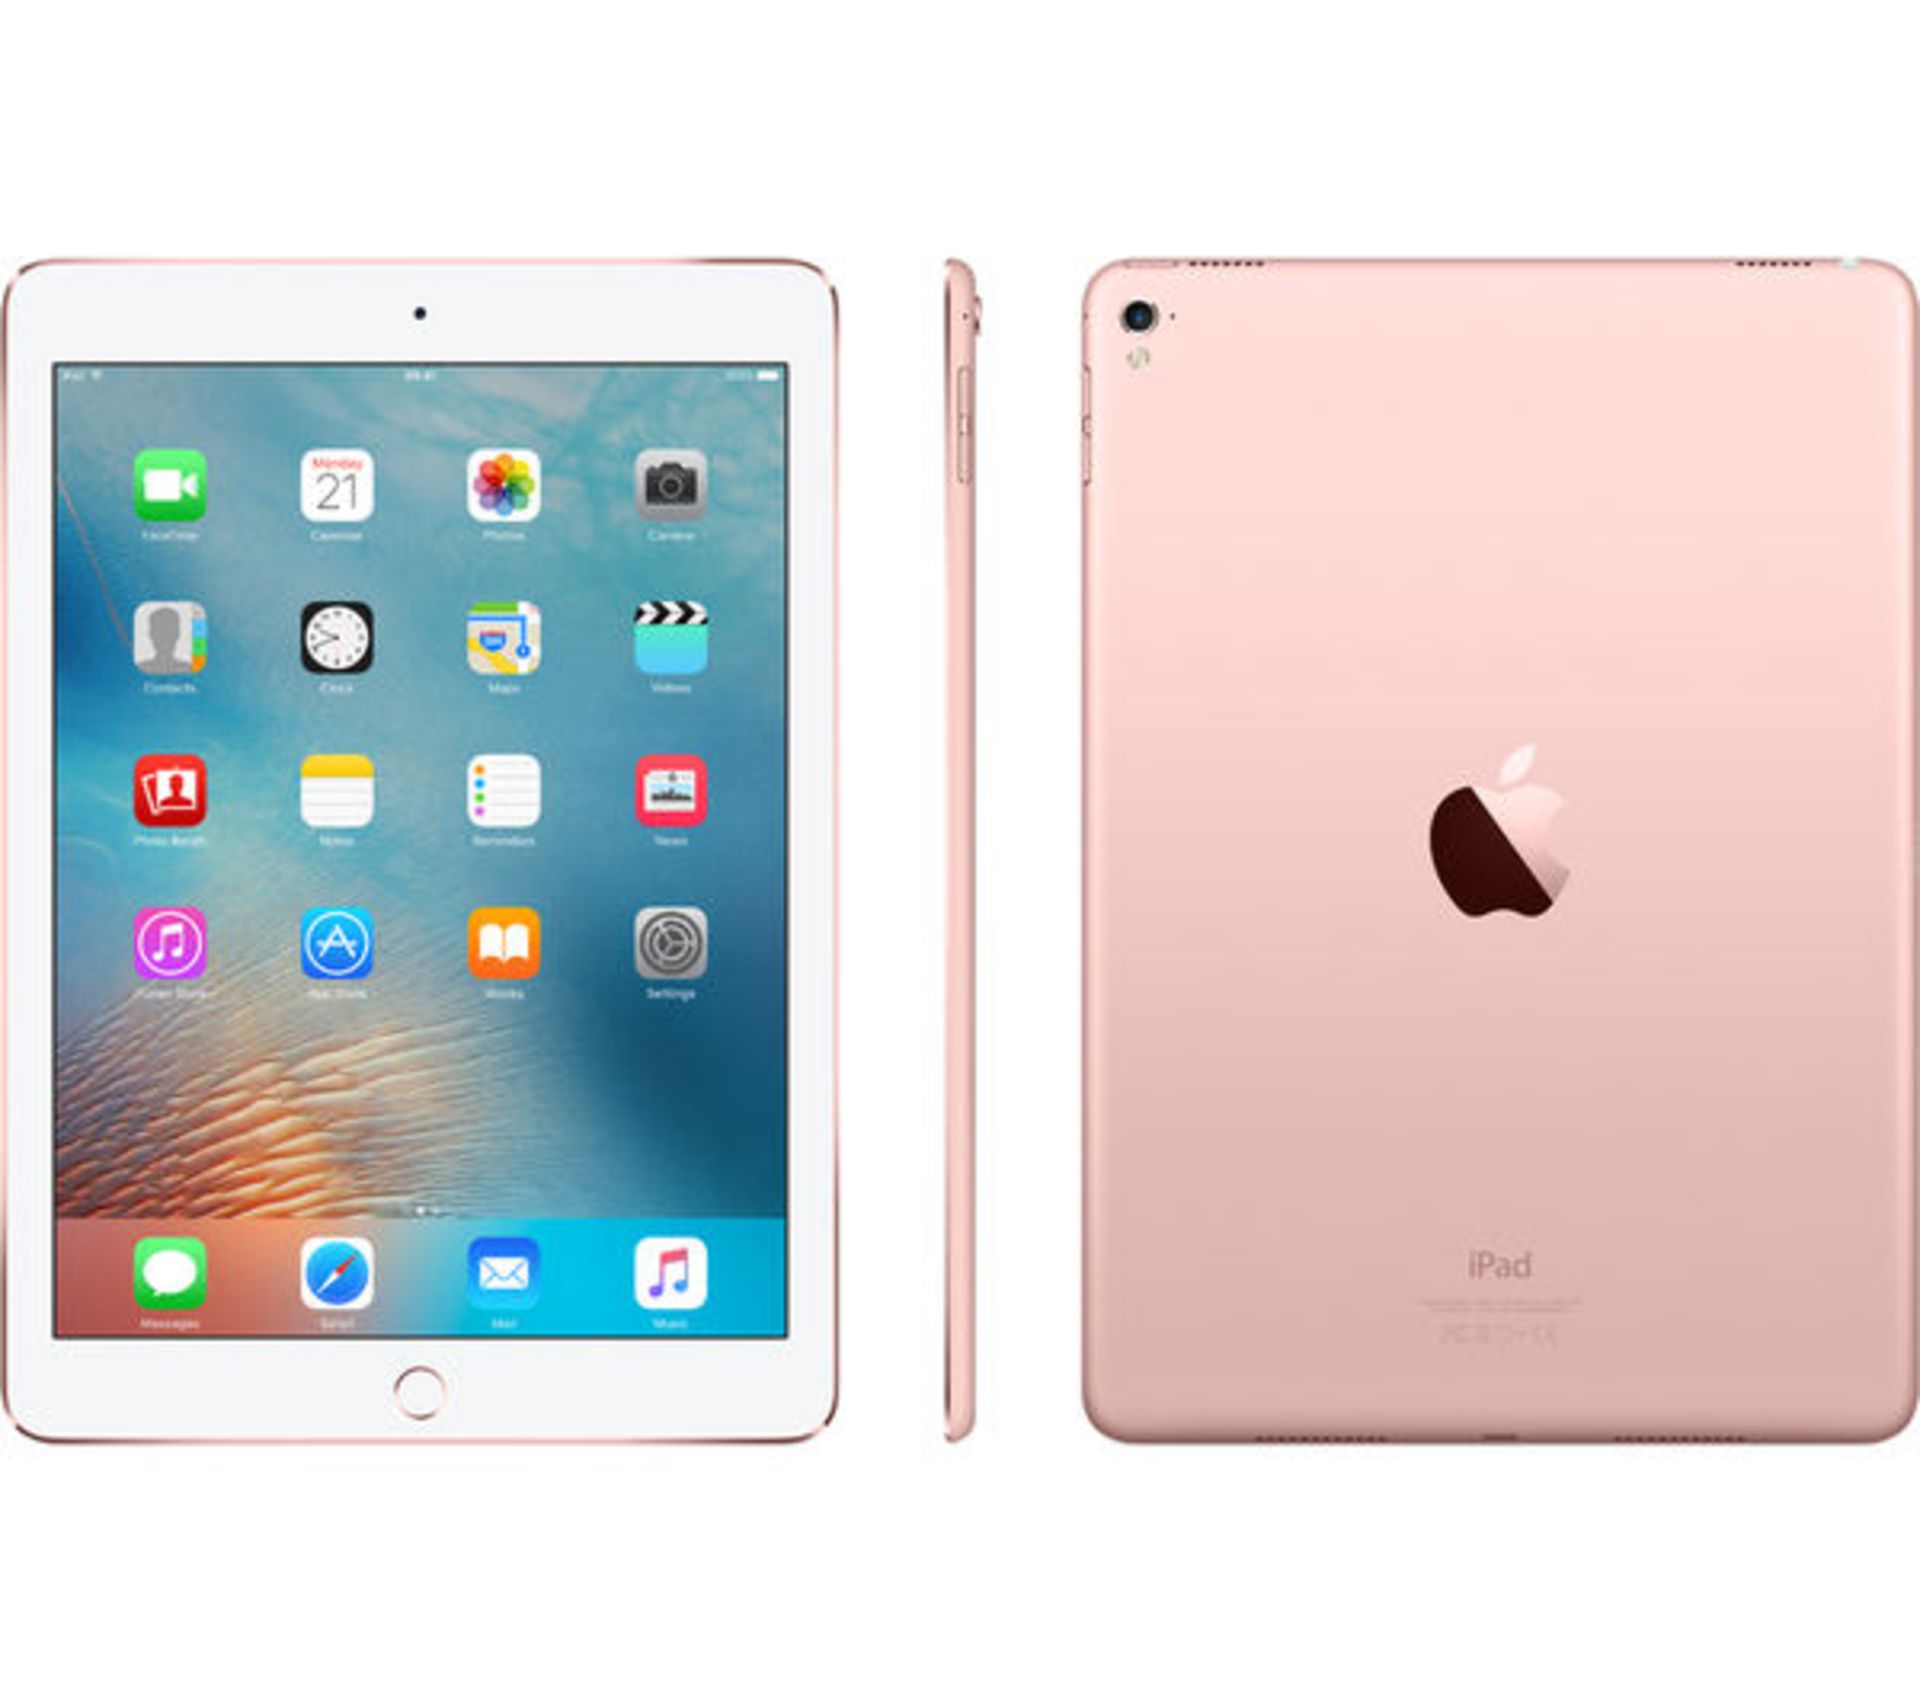 V Grade A/B Apple iPad Pro 9.7" 32GB Rose Gold - Wi-Fi - In Apple Box With Apple Accessories - Ex